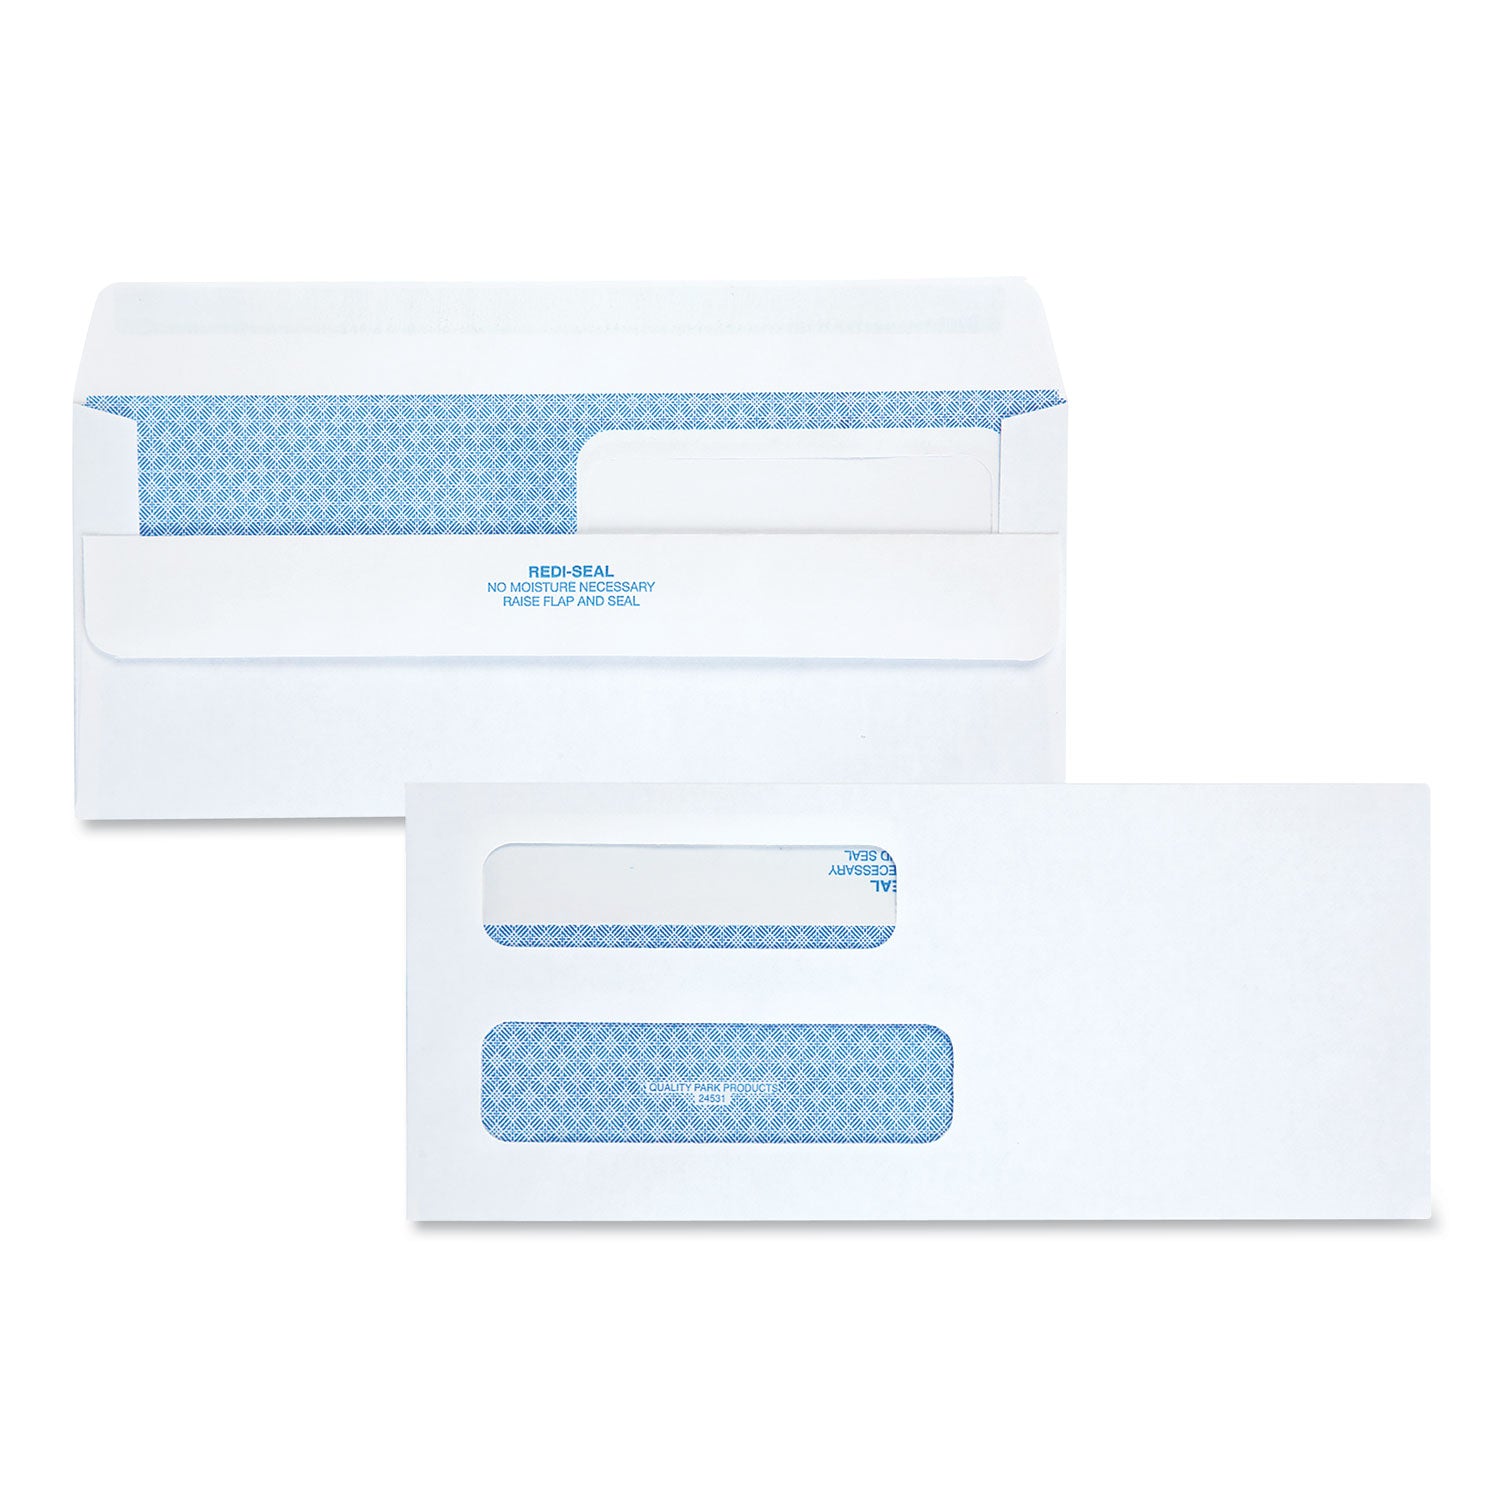 Double Window Redi-Seal Security-Tinted Envelope, #8 5/8, Commercial Flap, Redi-Seal Closure, 3.63 x 8.63, White, 250/Carton - 